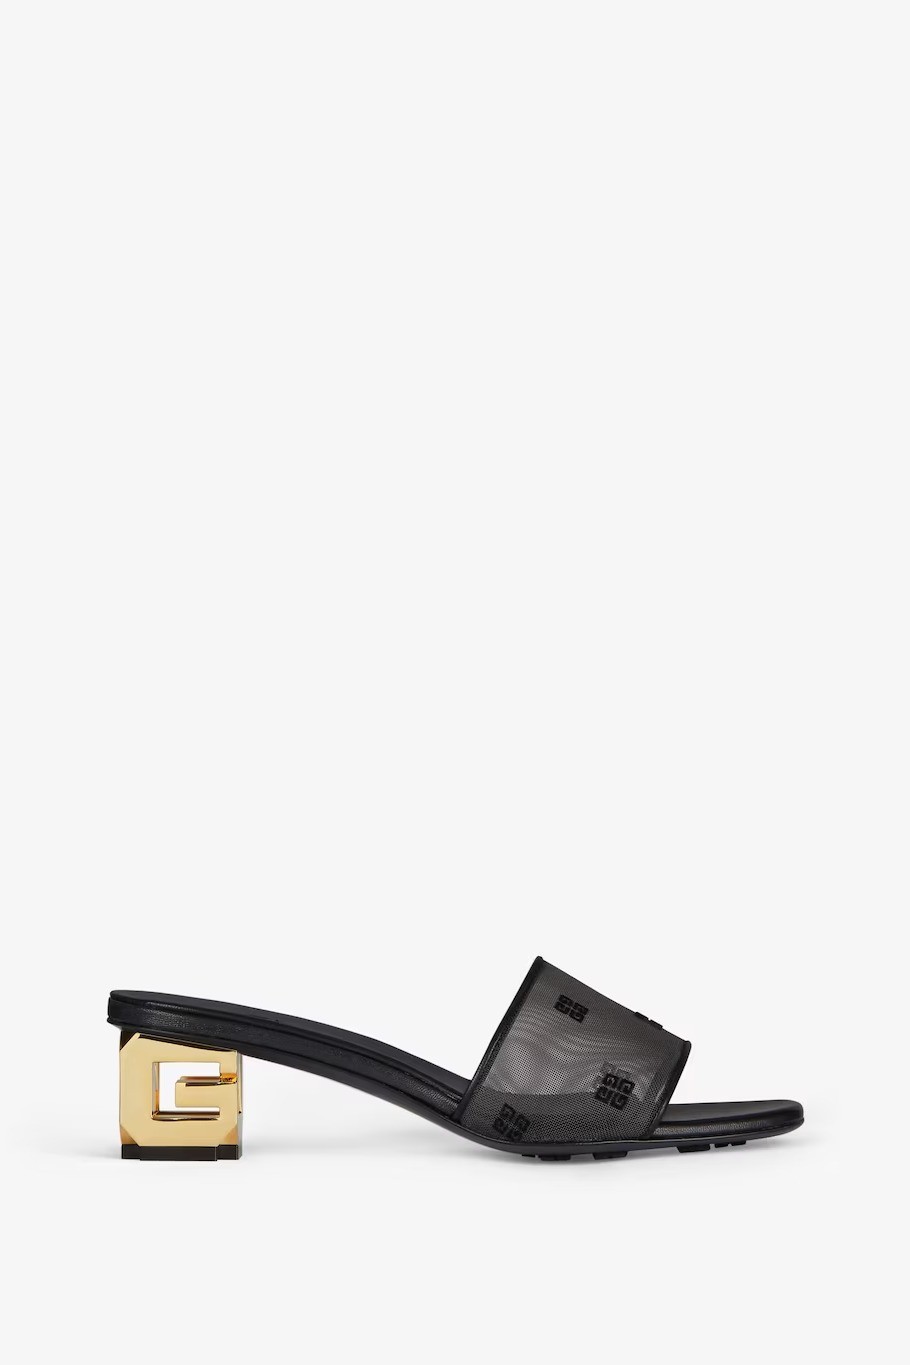 Givenchy - G Cube mules in 4G transparent mesh - Black